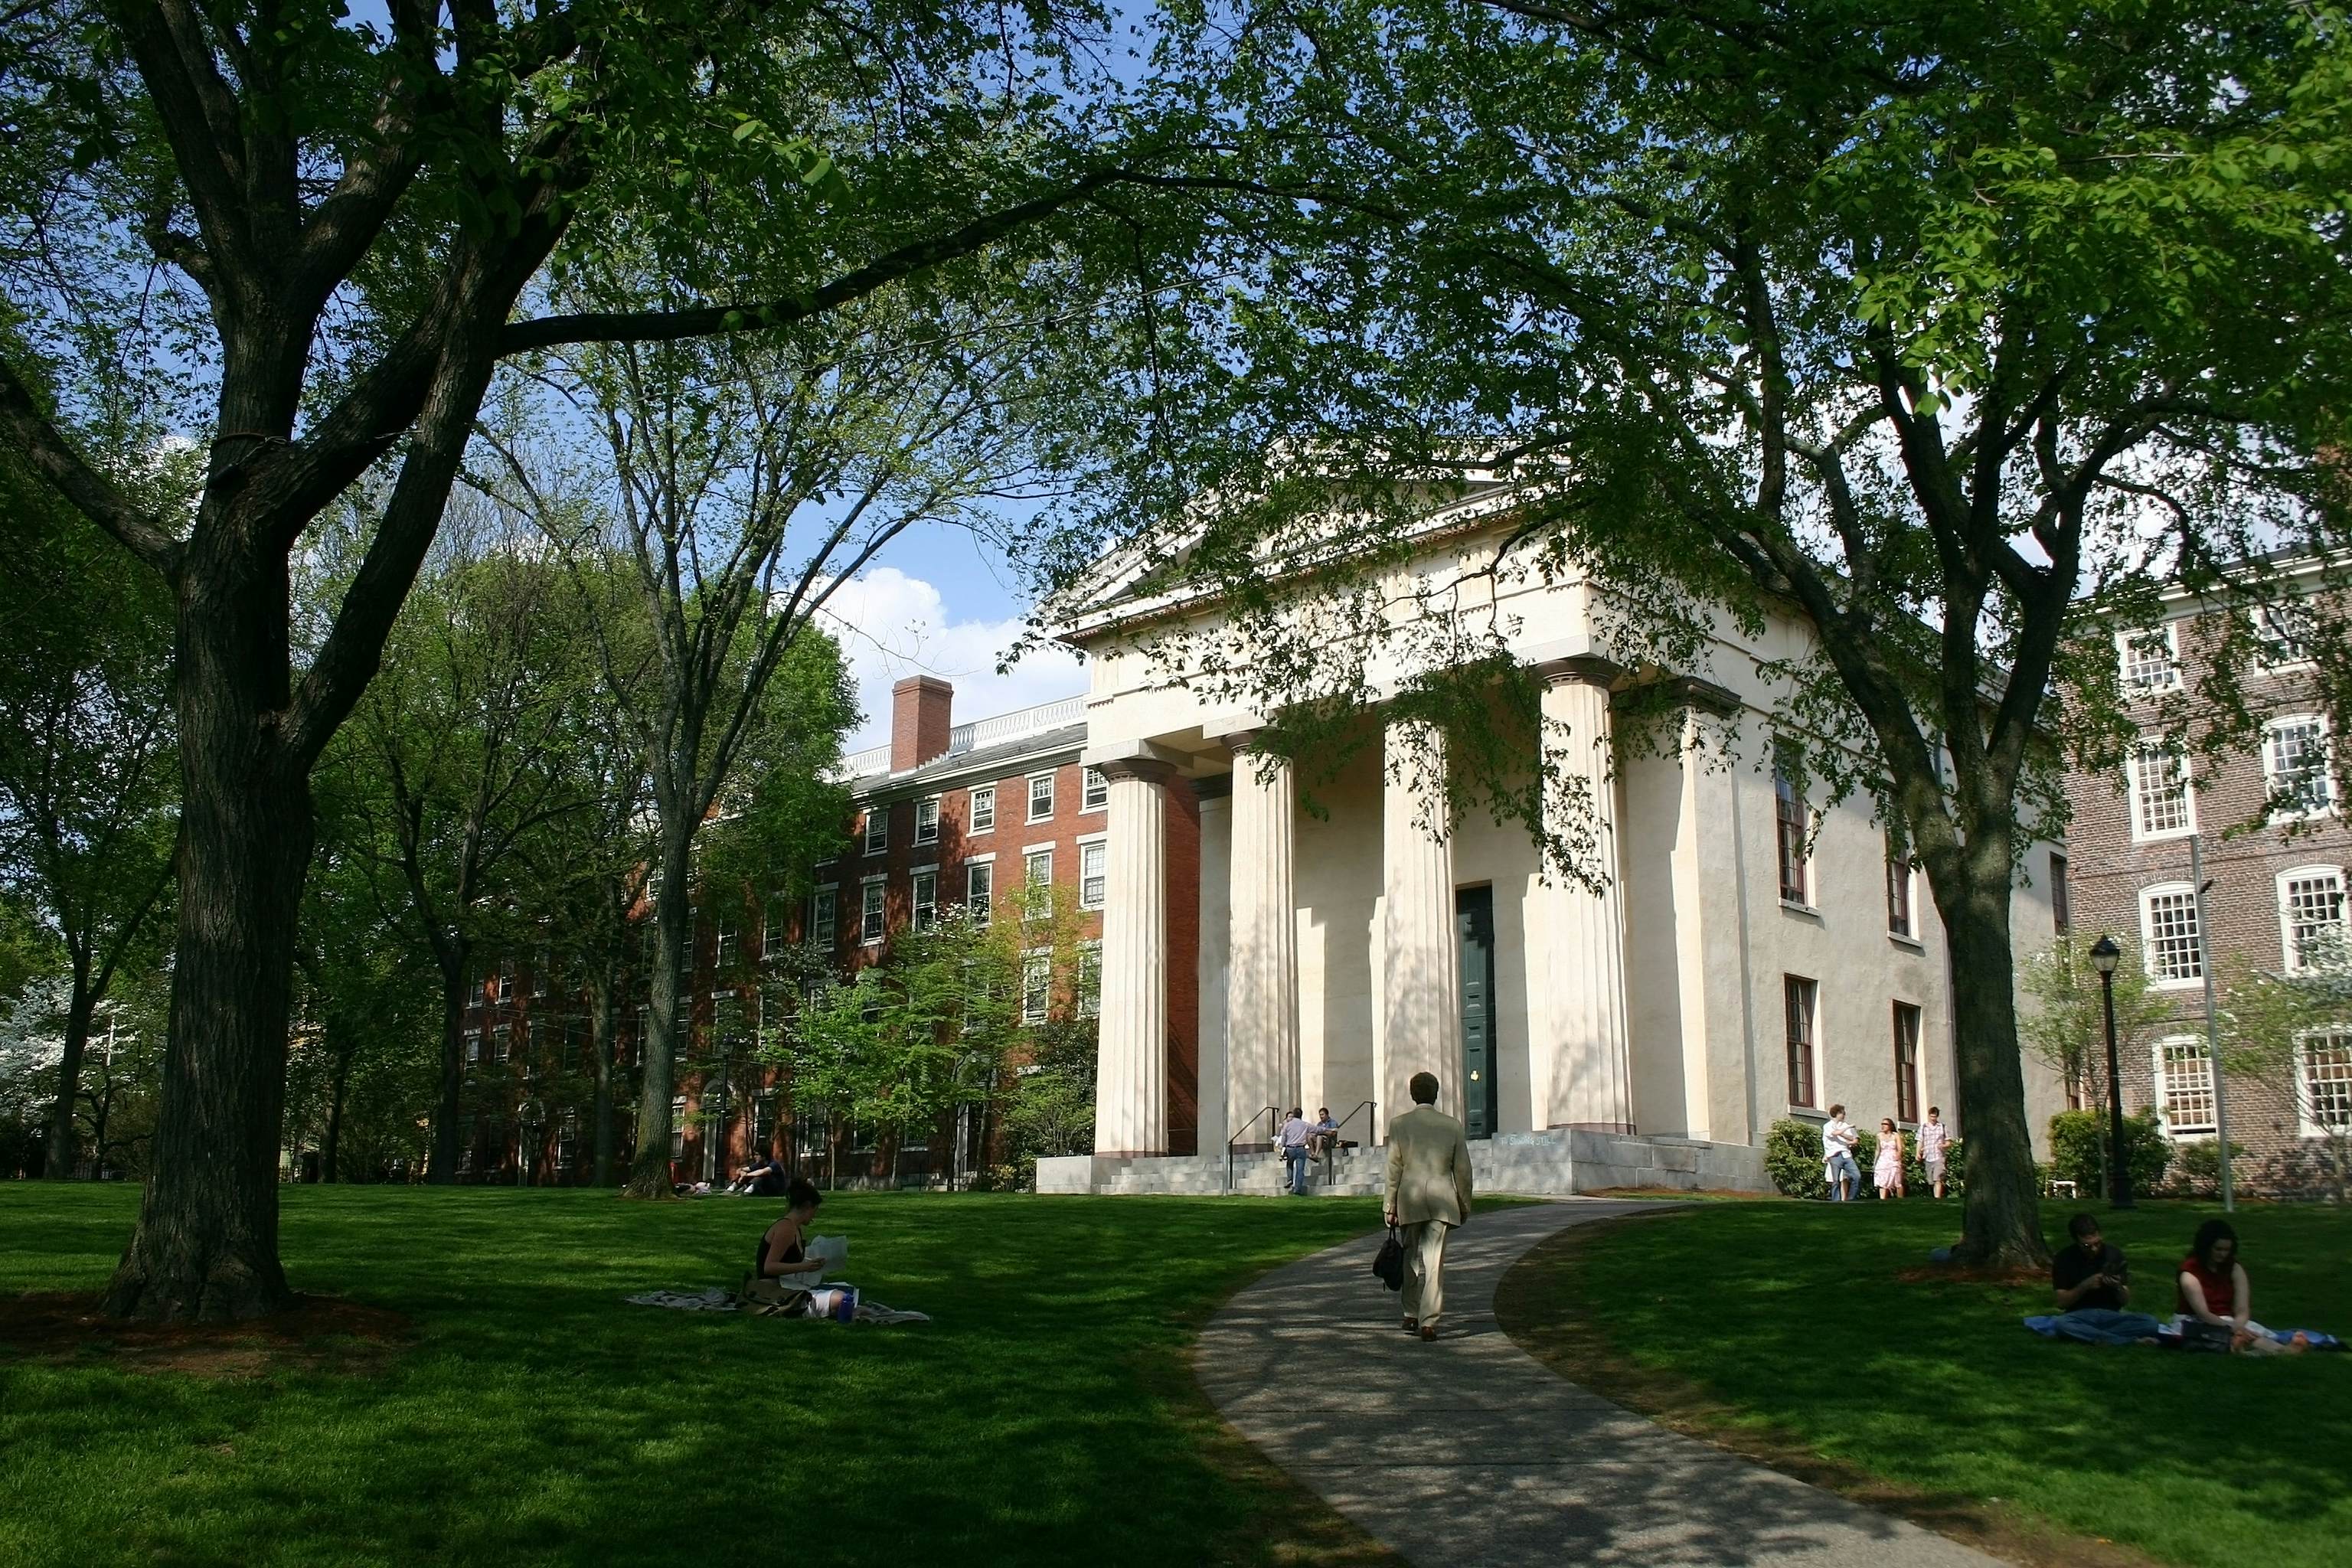 Brown University's endowment holds significant VC and private equity assets